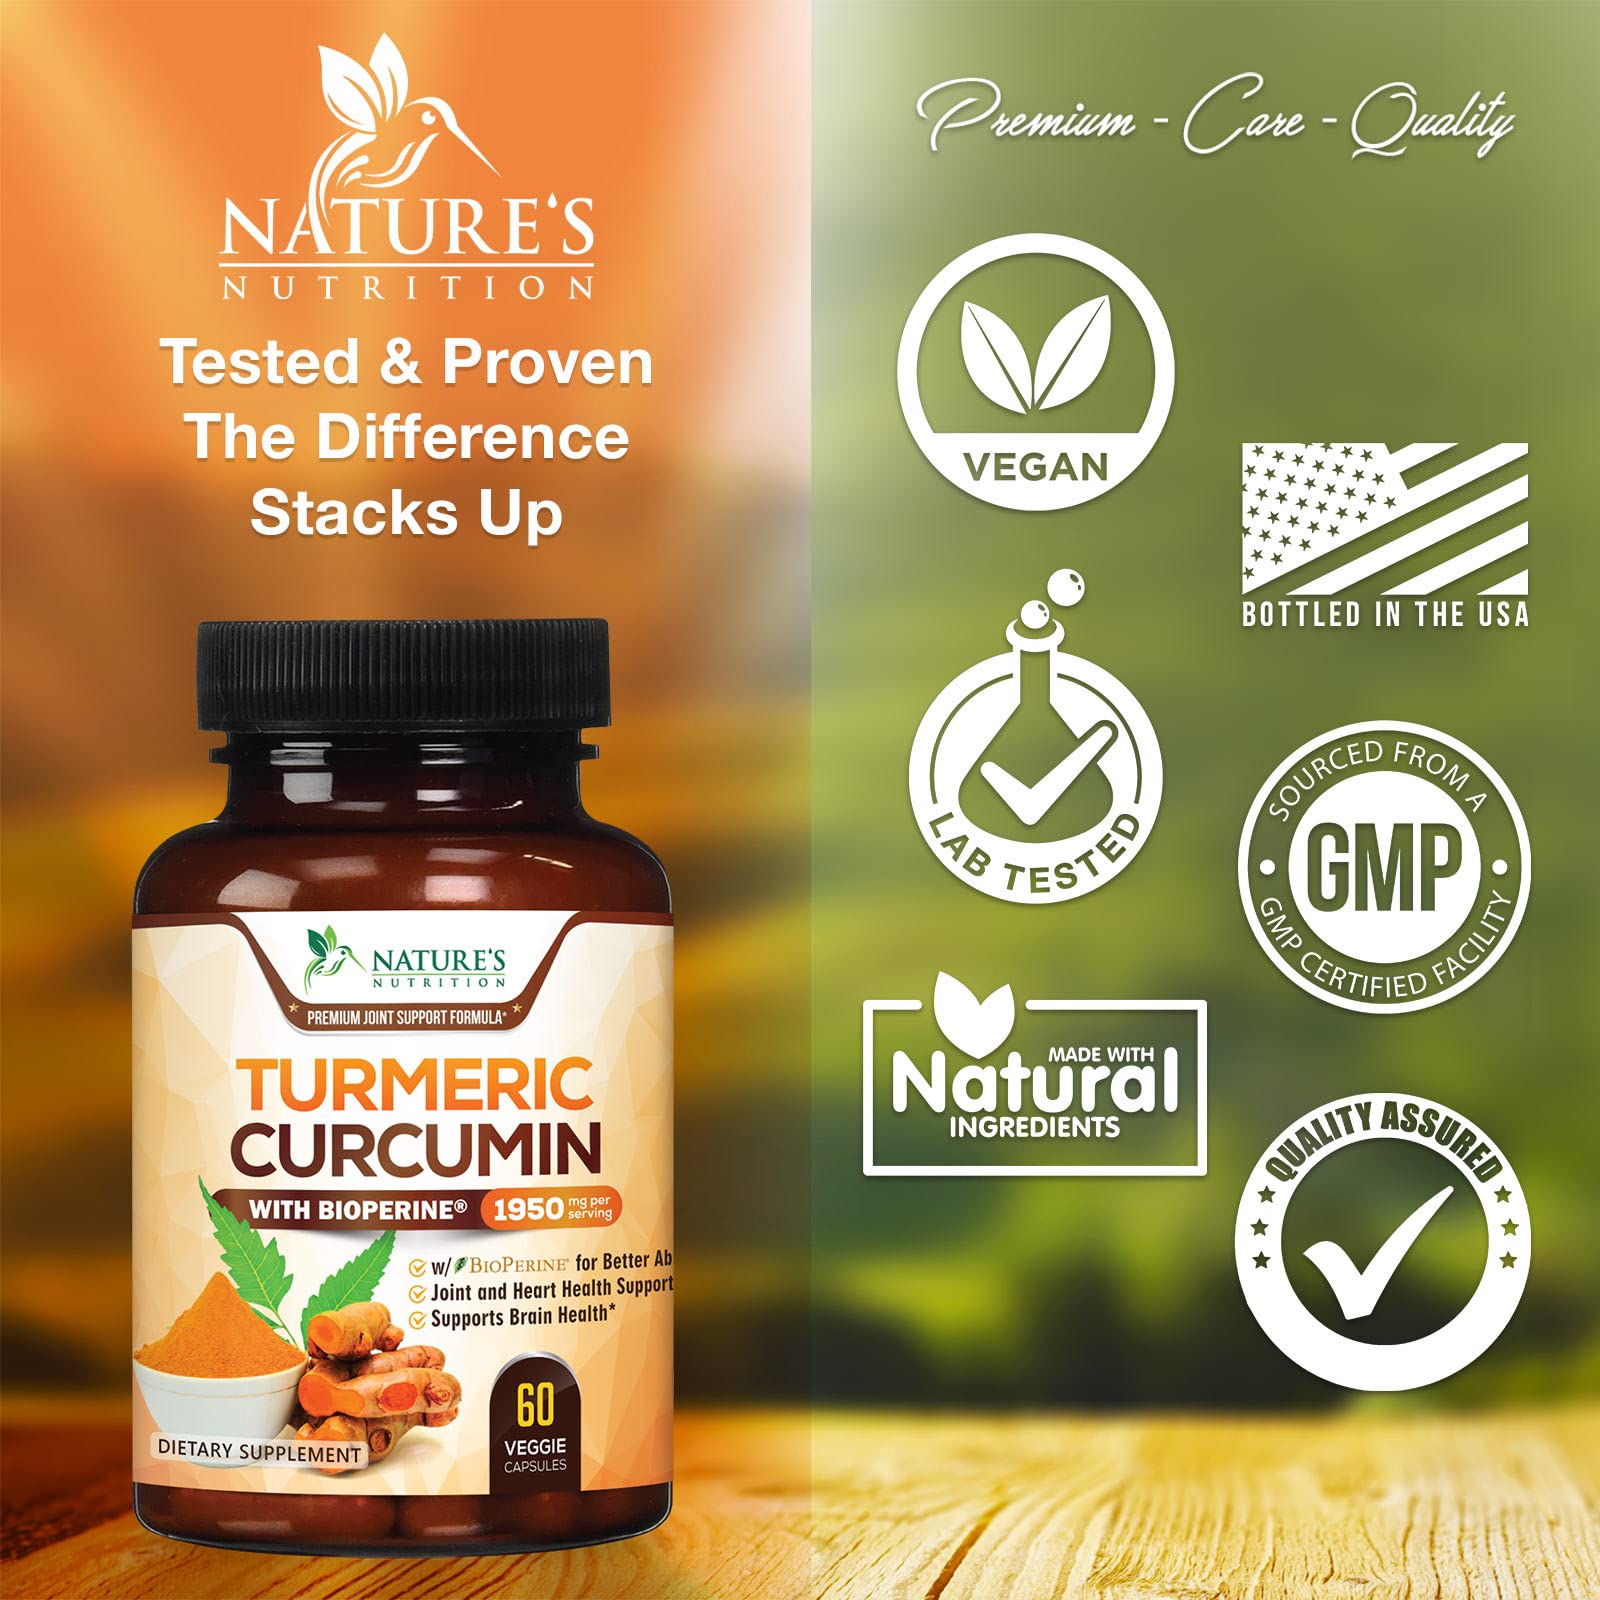 Turmeric Curcumin with BioPerine 95% Standardized Curcuminoids 1950mg - Black Pepper for Max Absorption, Natural Joint Support, Nature's Tumeric Extract, Herbal Supplement, Non-GMO - 60 Capsules